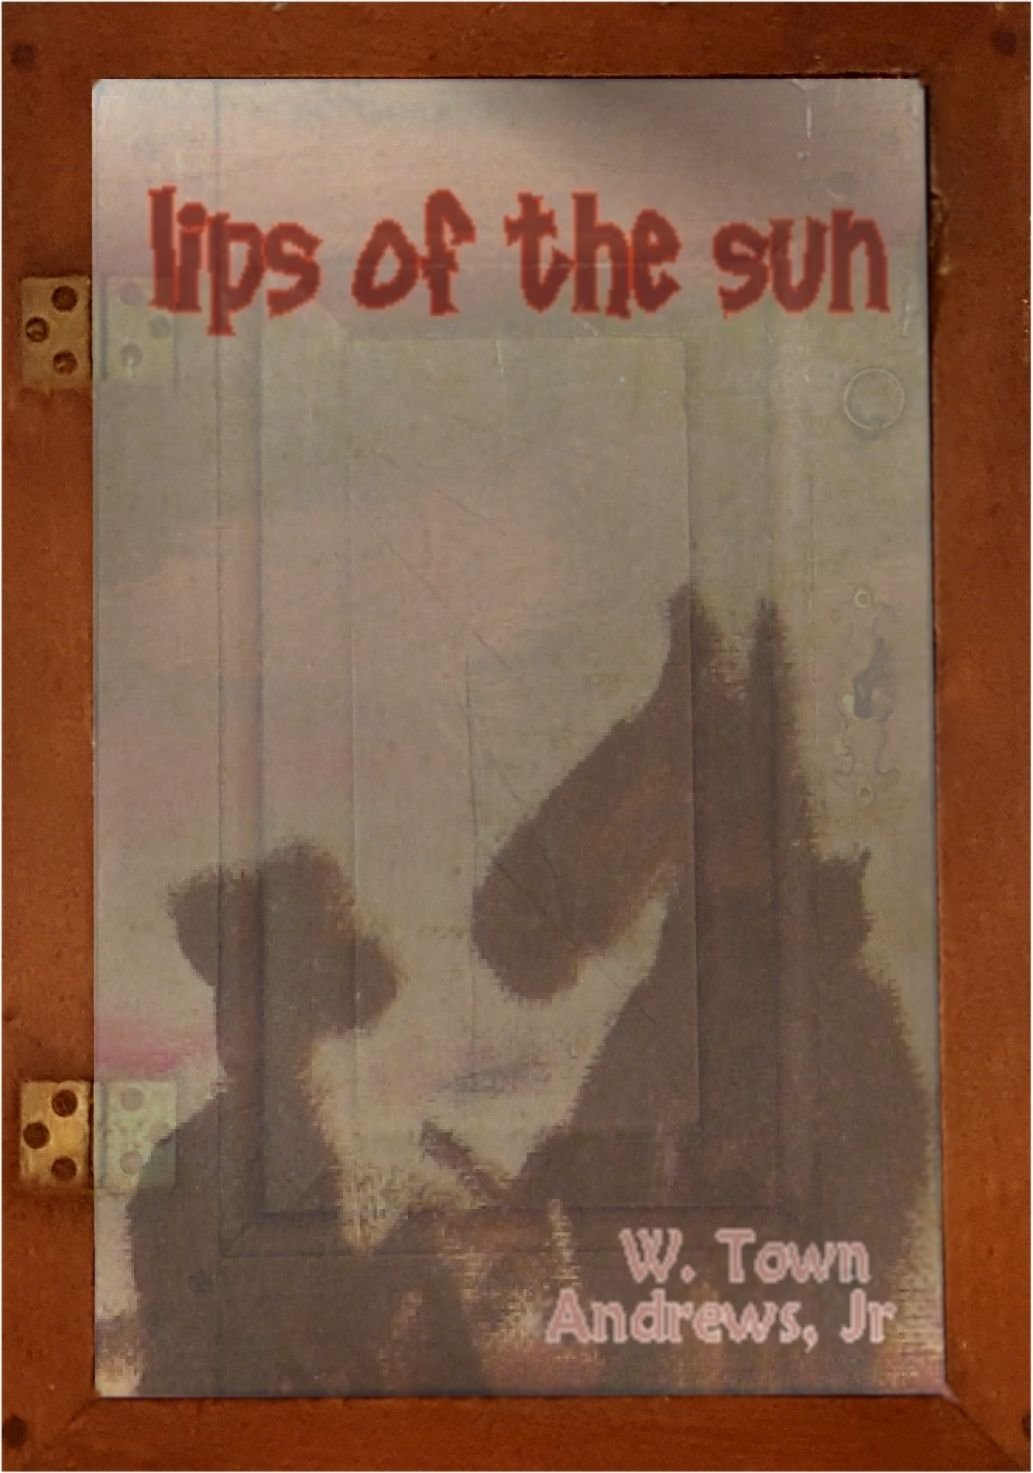 Cover, Lips of the Sun